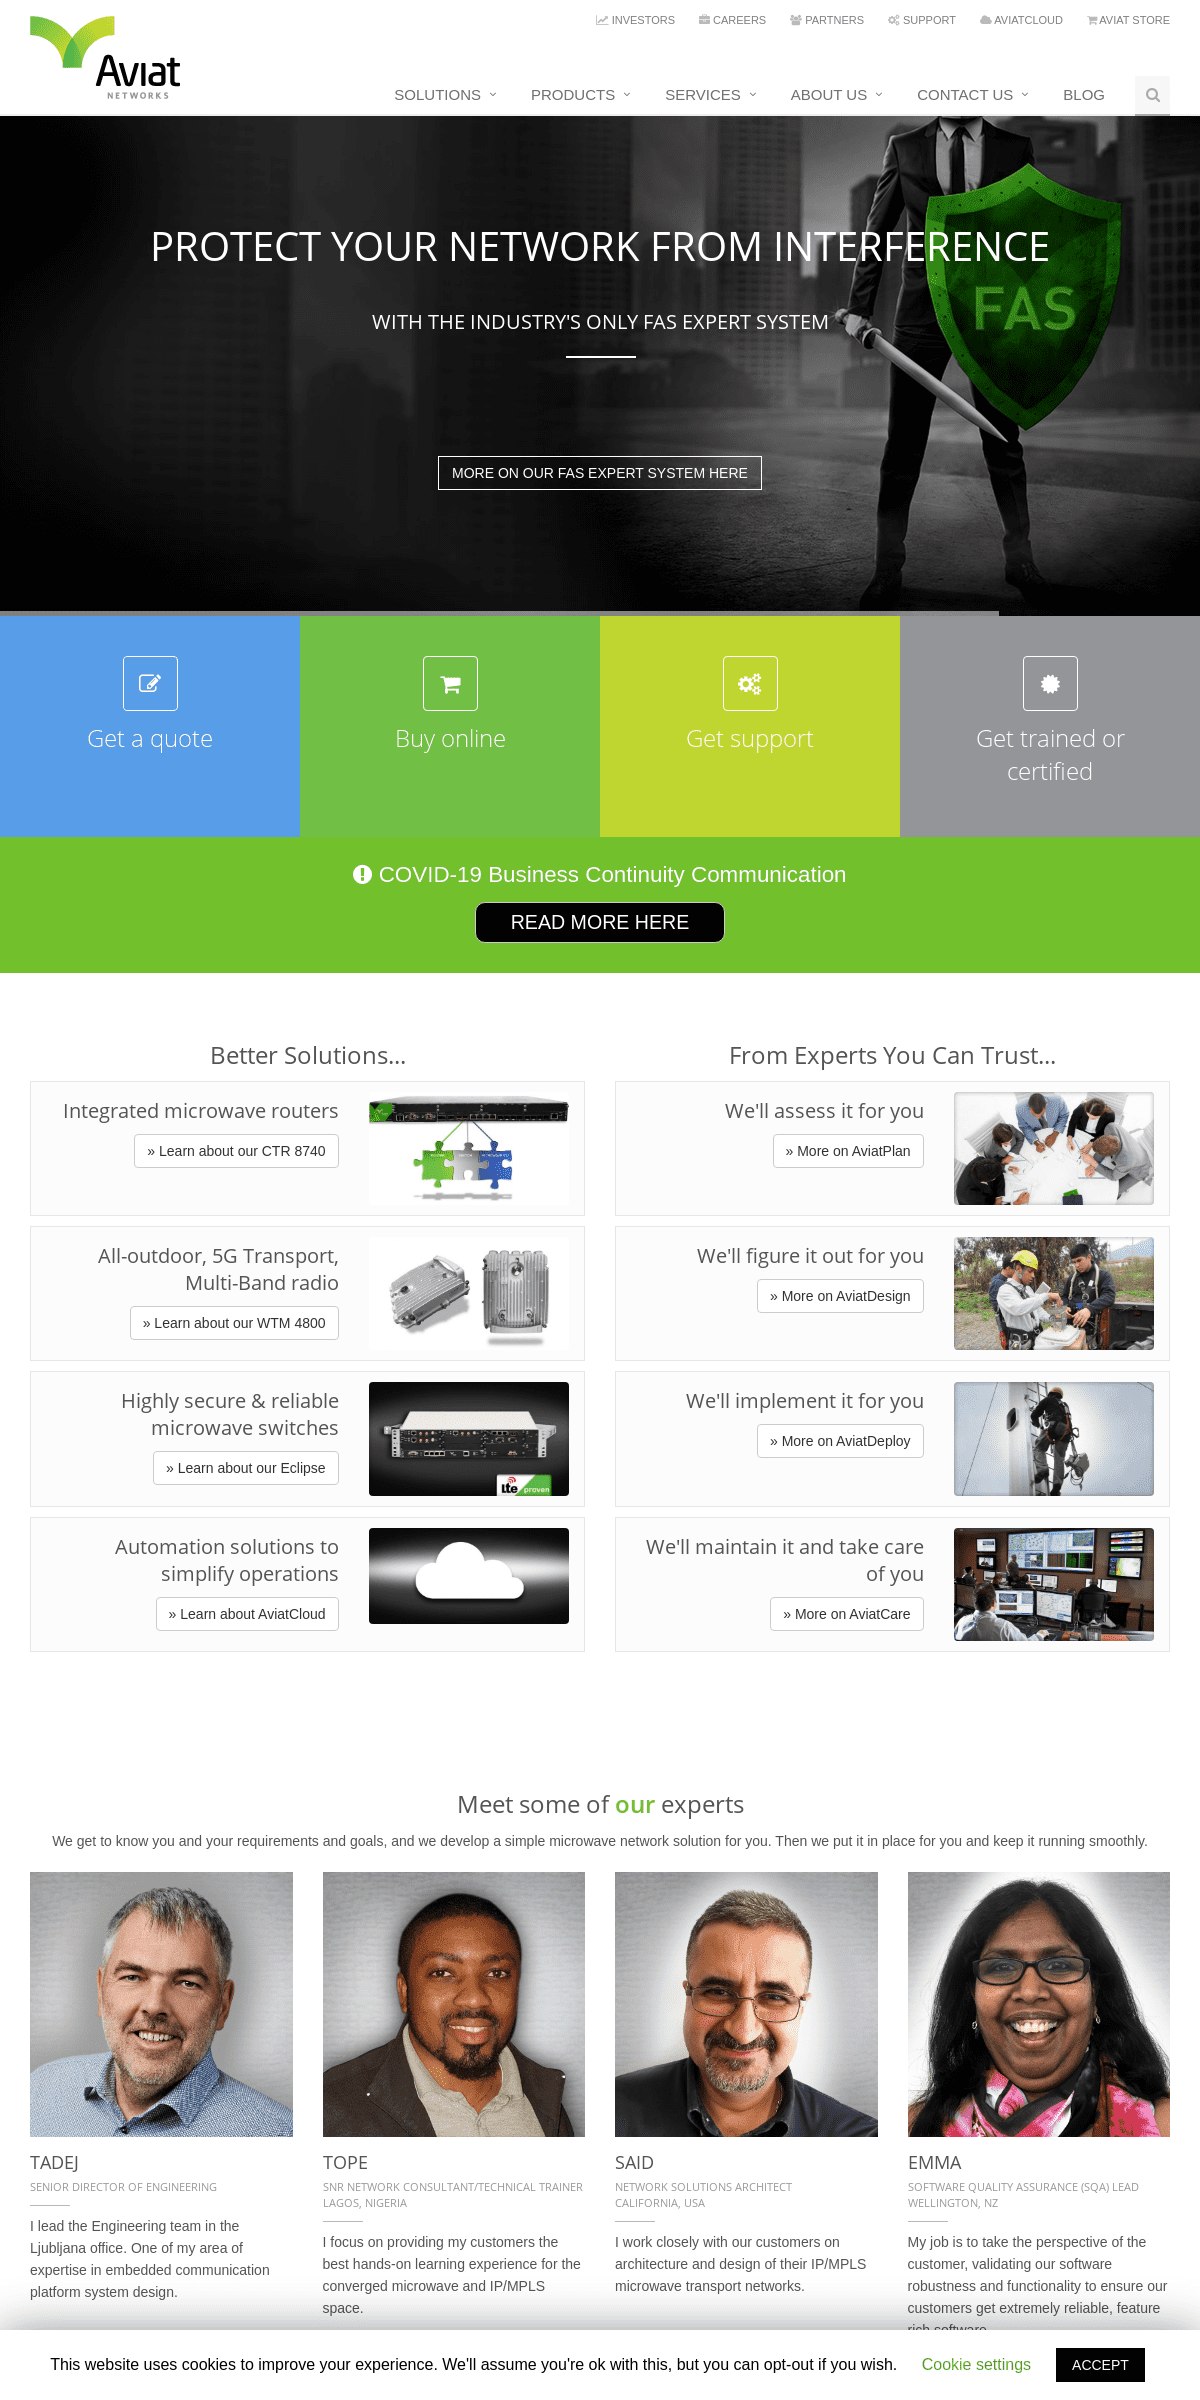 A complete backup of aviatnetworks.com